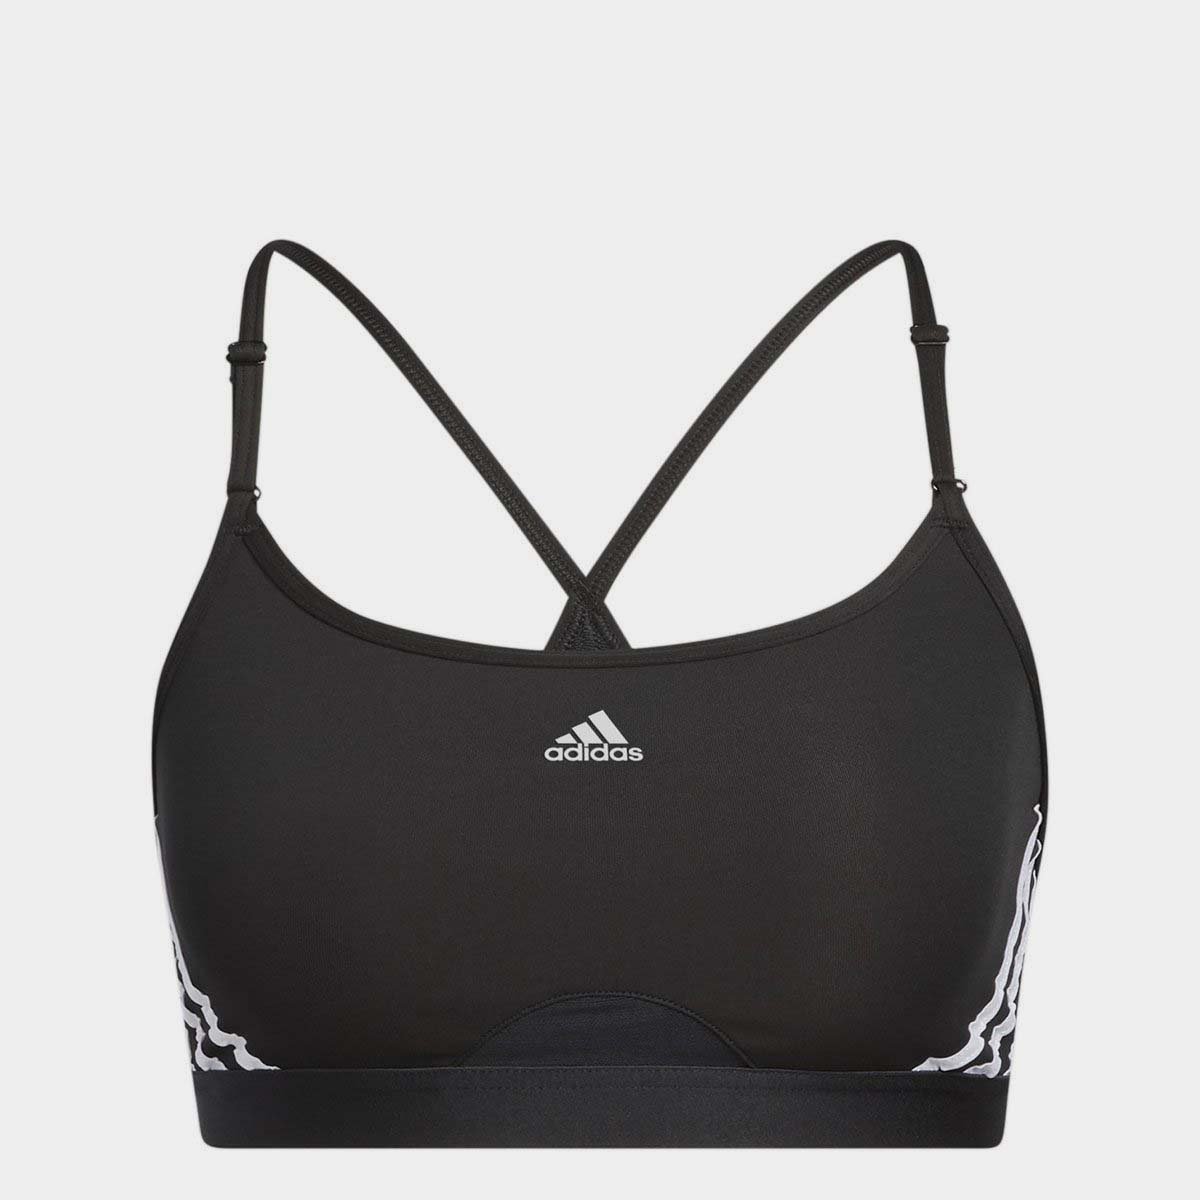 SMALL SIZES - XS & S Under Armour BREATHLUX PERFORATED - Sports Bra -  Women's - black/black/metallic gold - Private Sport Shop